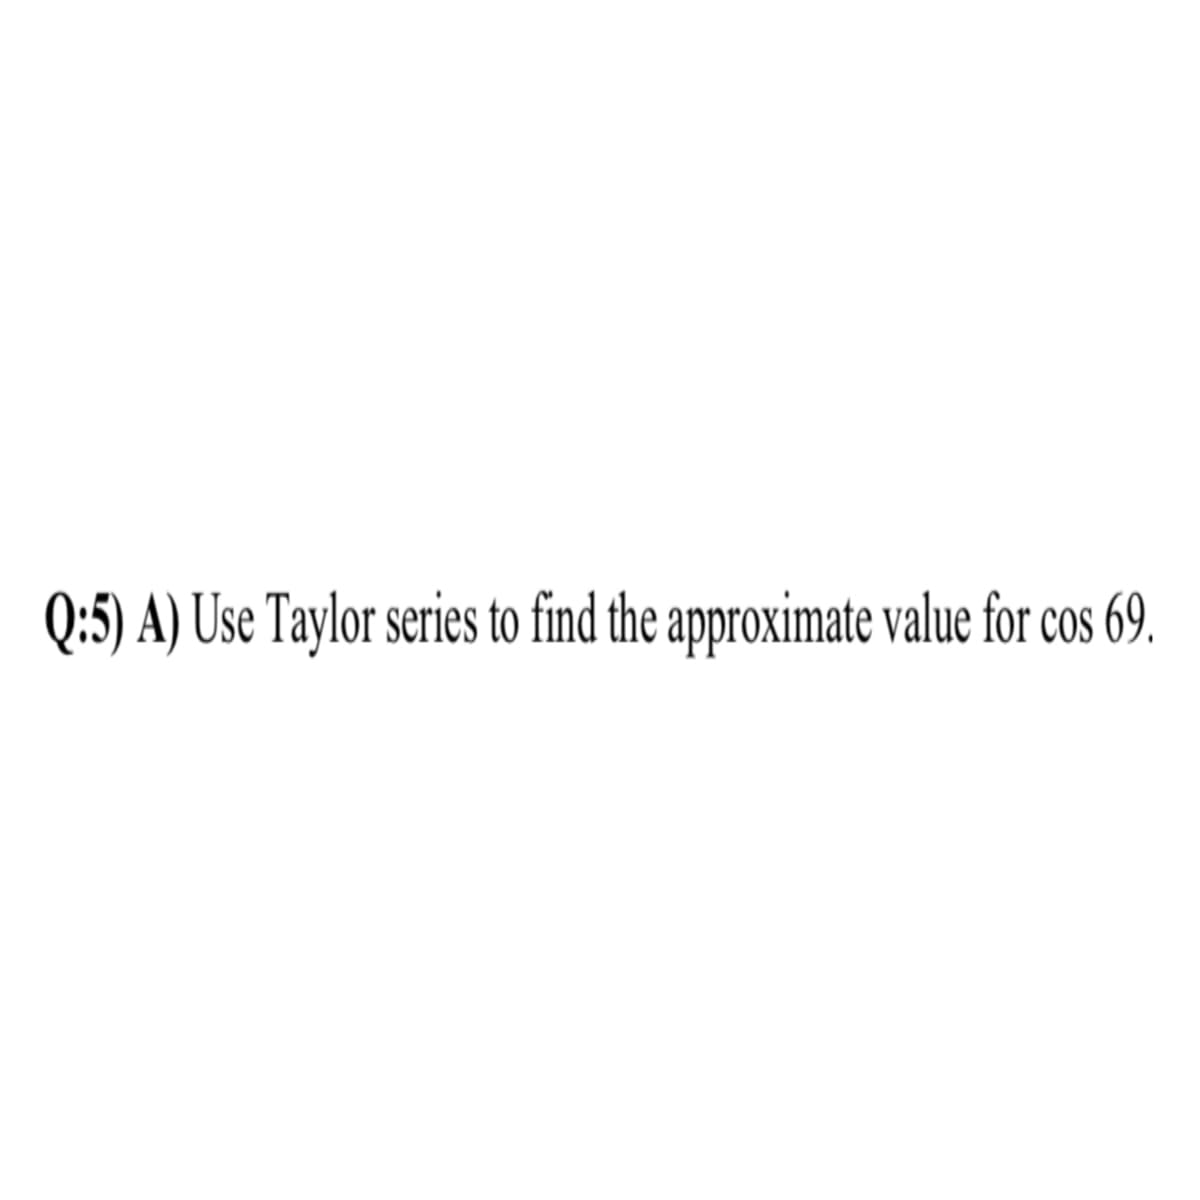 Q:5) A) Use Taylor series to find the approximate value for cos 69.
